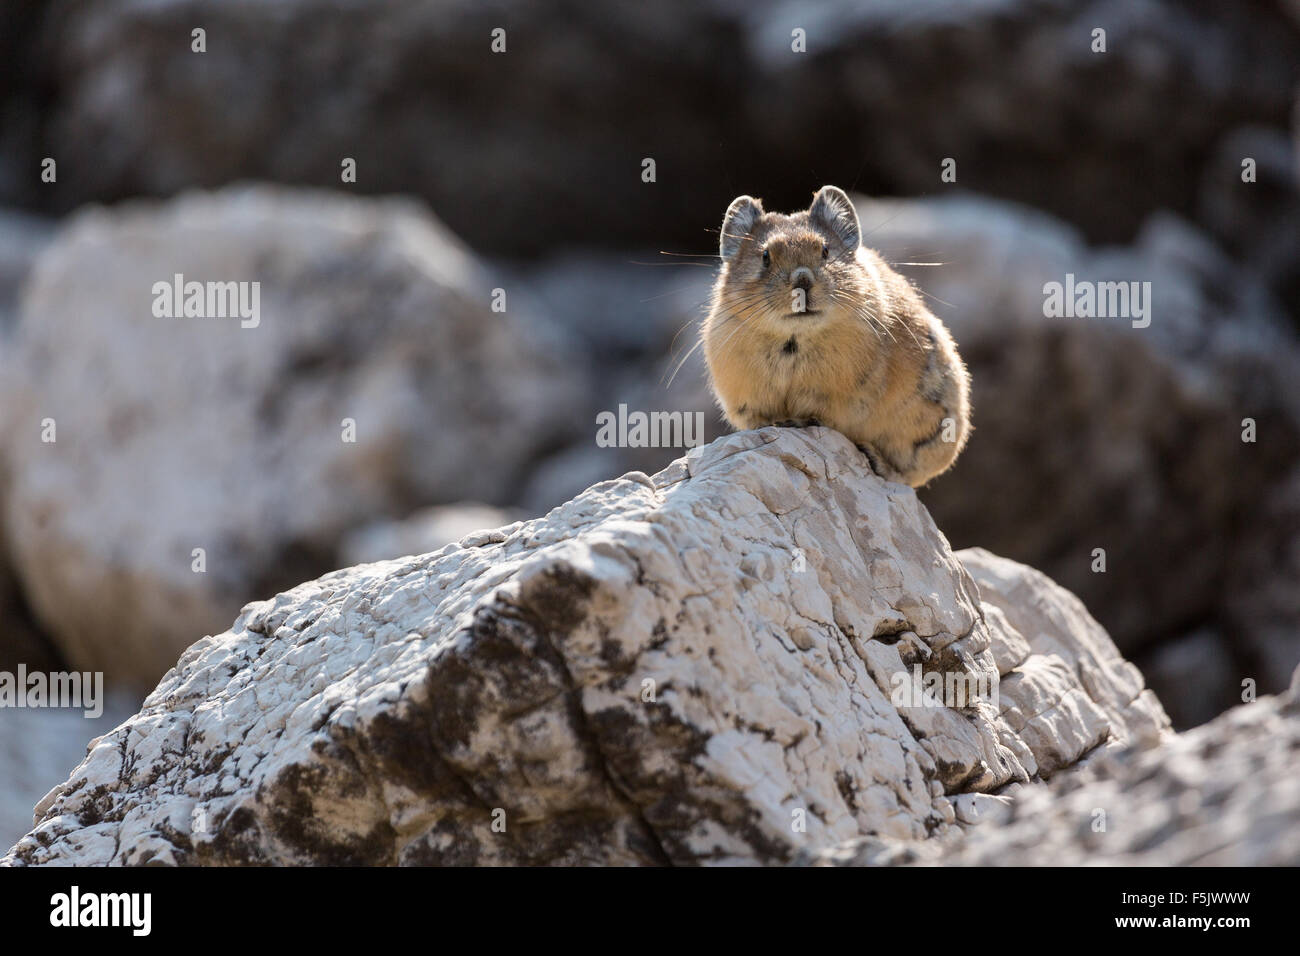 A pika looks curiously outward from a boulder, Gros Ventre Wilderness, Wyoming Stock Photo